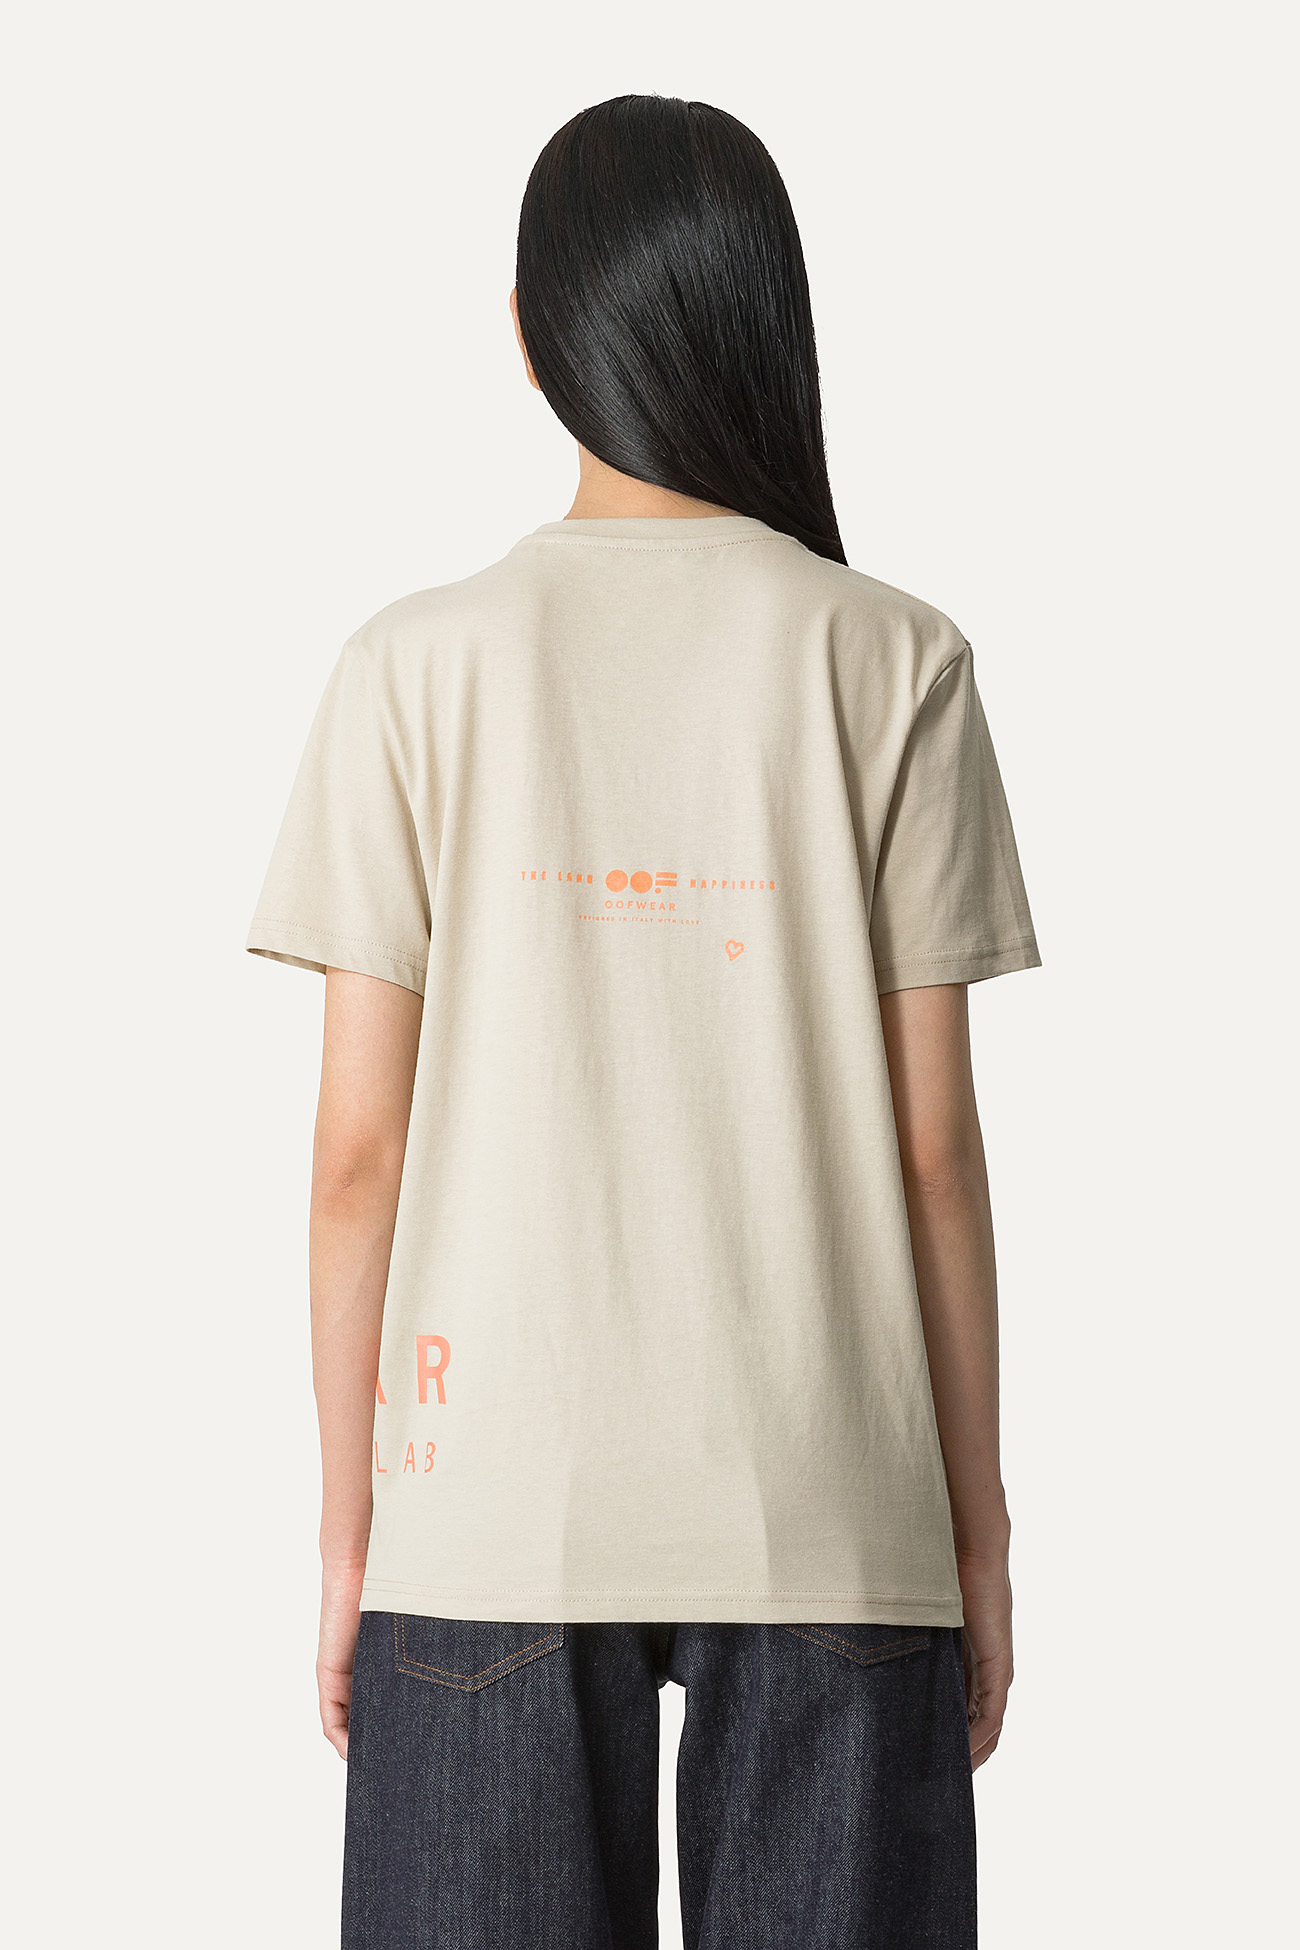 COTTON T-SHIRT WITH LOGO - SAND - OOF WEAR